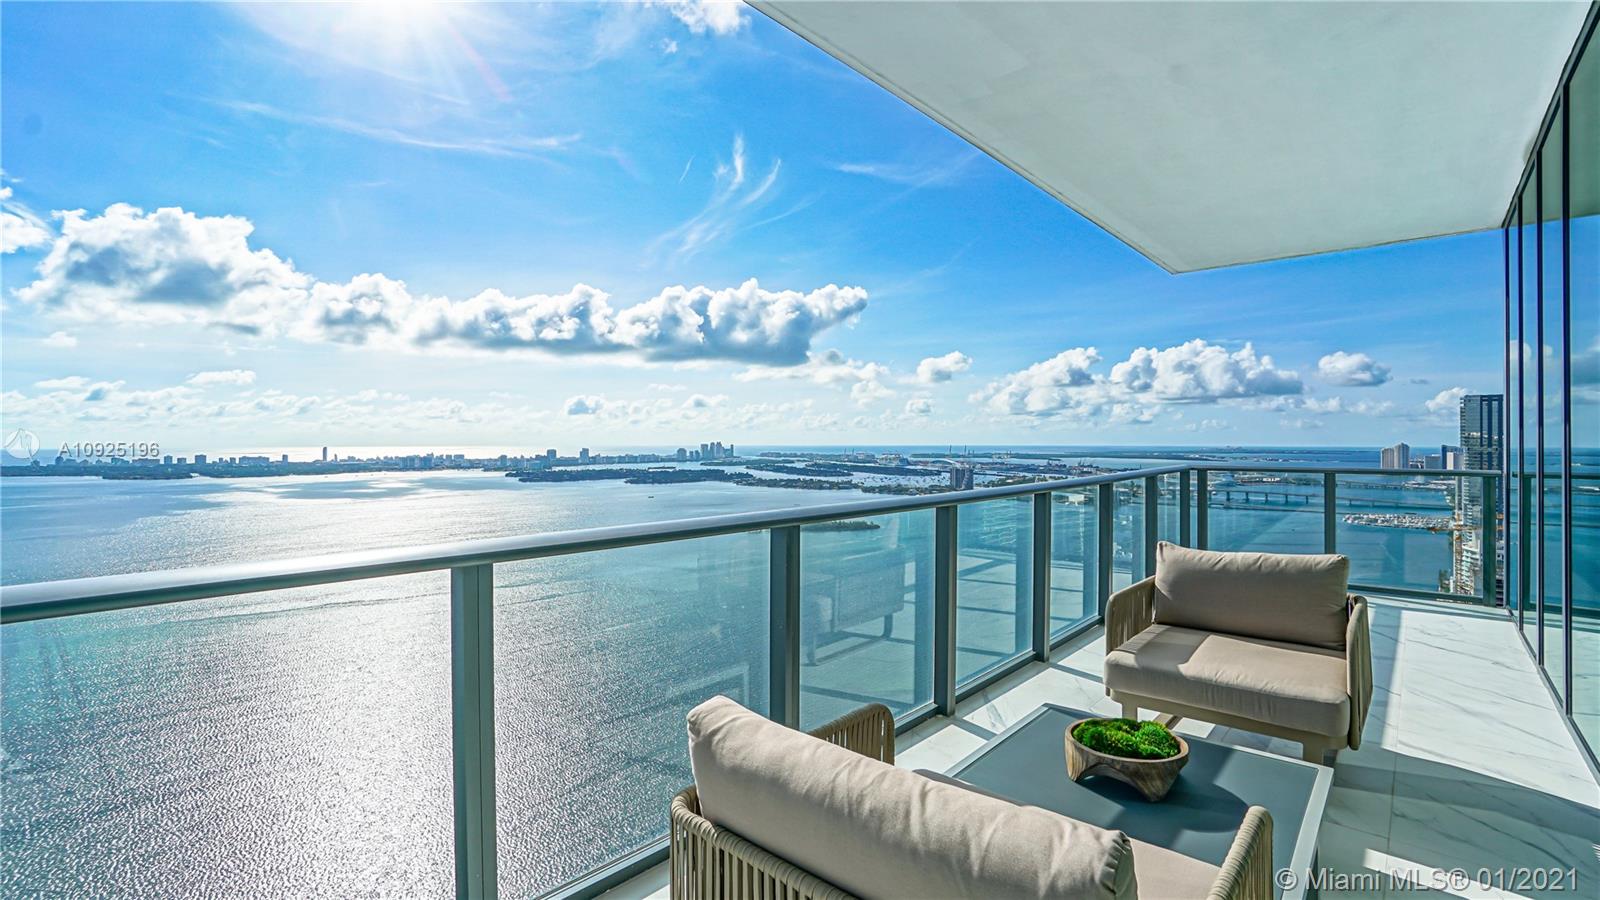 Luxury has been re-imagined in this direct bay front sky Penthouse fully turnkey & finely equipped by Artefacto. Enjoy sun-filled living & the calming sound of the bay in this flawless showplace featuring 3 bedrooms with en-suite bespoke baths. Spanning a luxurious 2662 SF, private elevator & formal entry leads to a breathtaking view of Biscayne Bay & the ocean. Home chefs will enjoy appointments of Sub-zero & Wolf appliances which have been flawlessly integrated into the design, offering an ideal setting for seamless entertaining & intimate daily living. Curated amenities include 24-hour doorman service, bay front pool w/cabanas, indoor heated pool, beach club, tennis, state-of-the-art fitness center, spa, yoga & massage rooms, spinning, business, center & children's room.